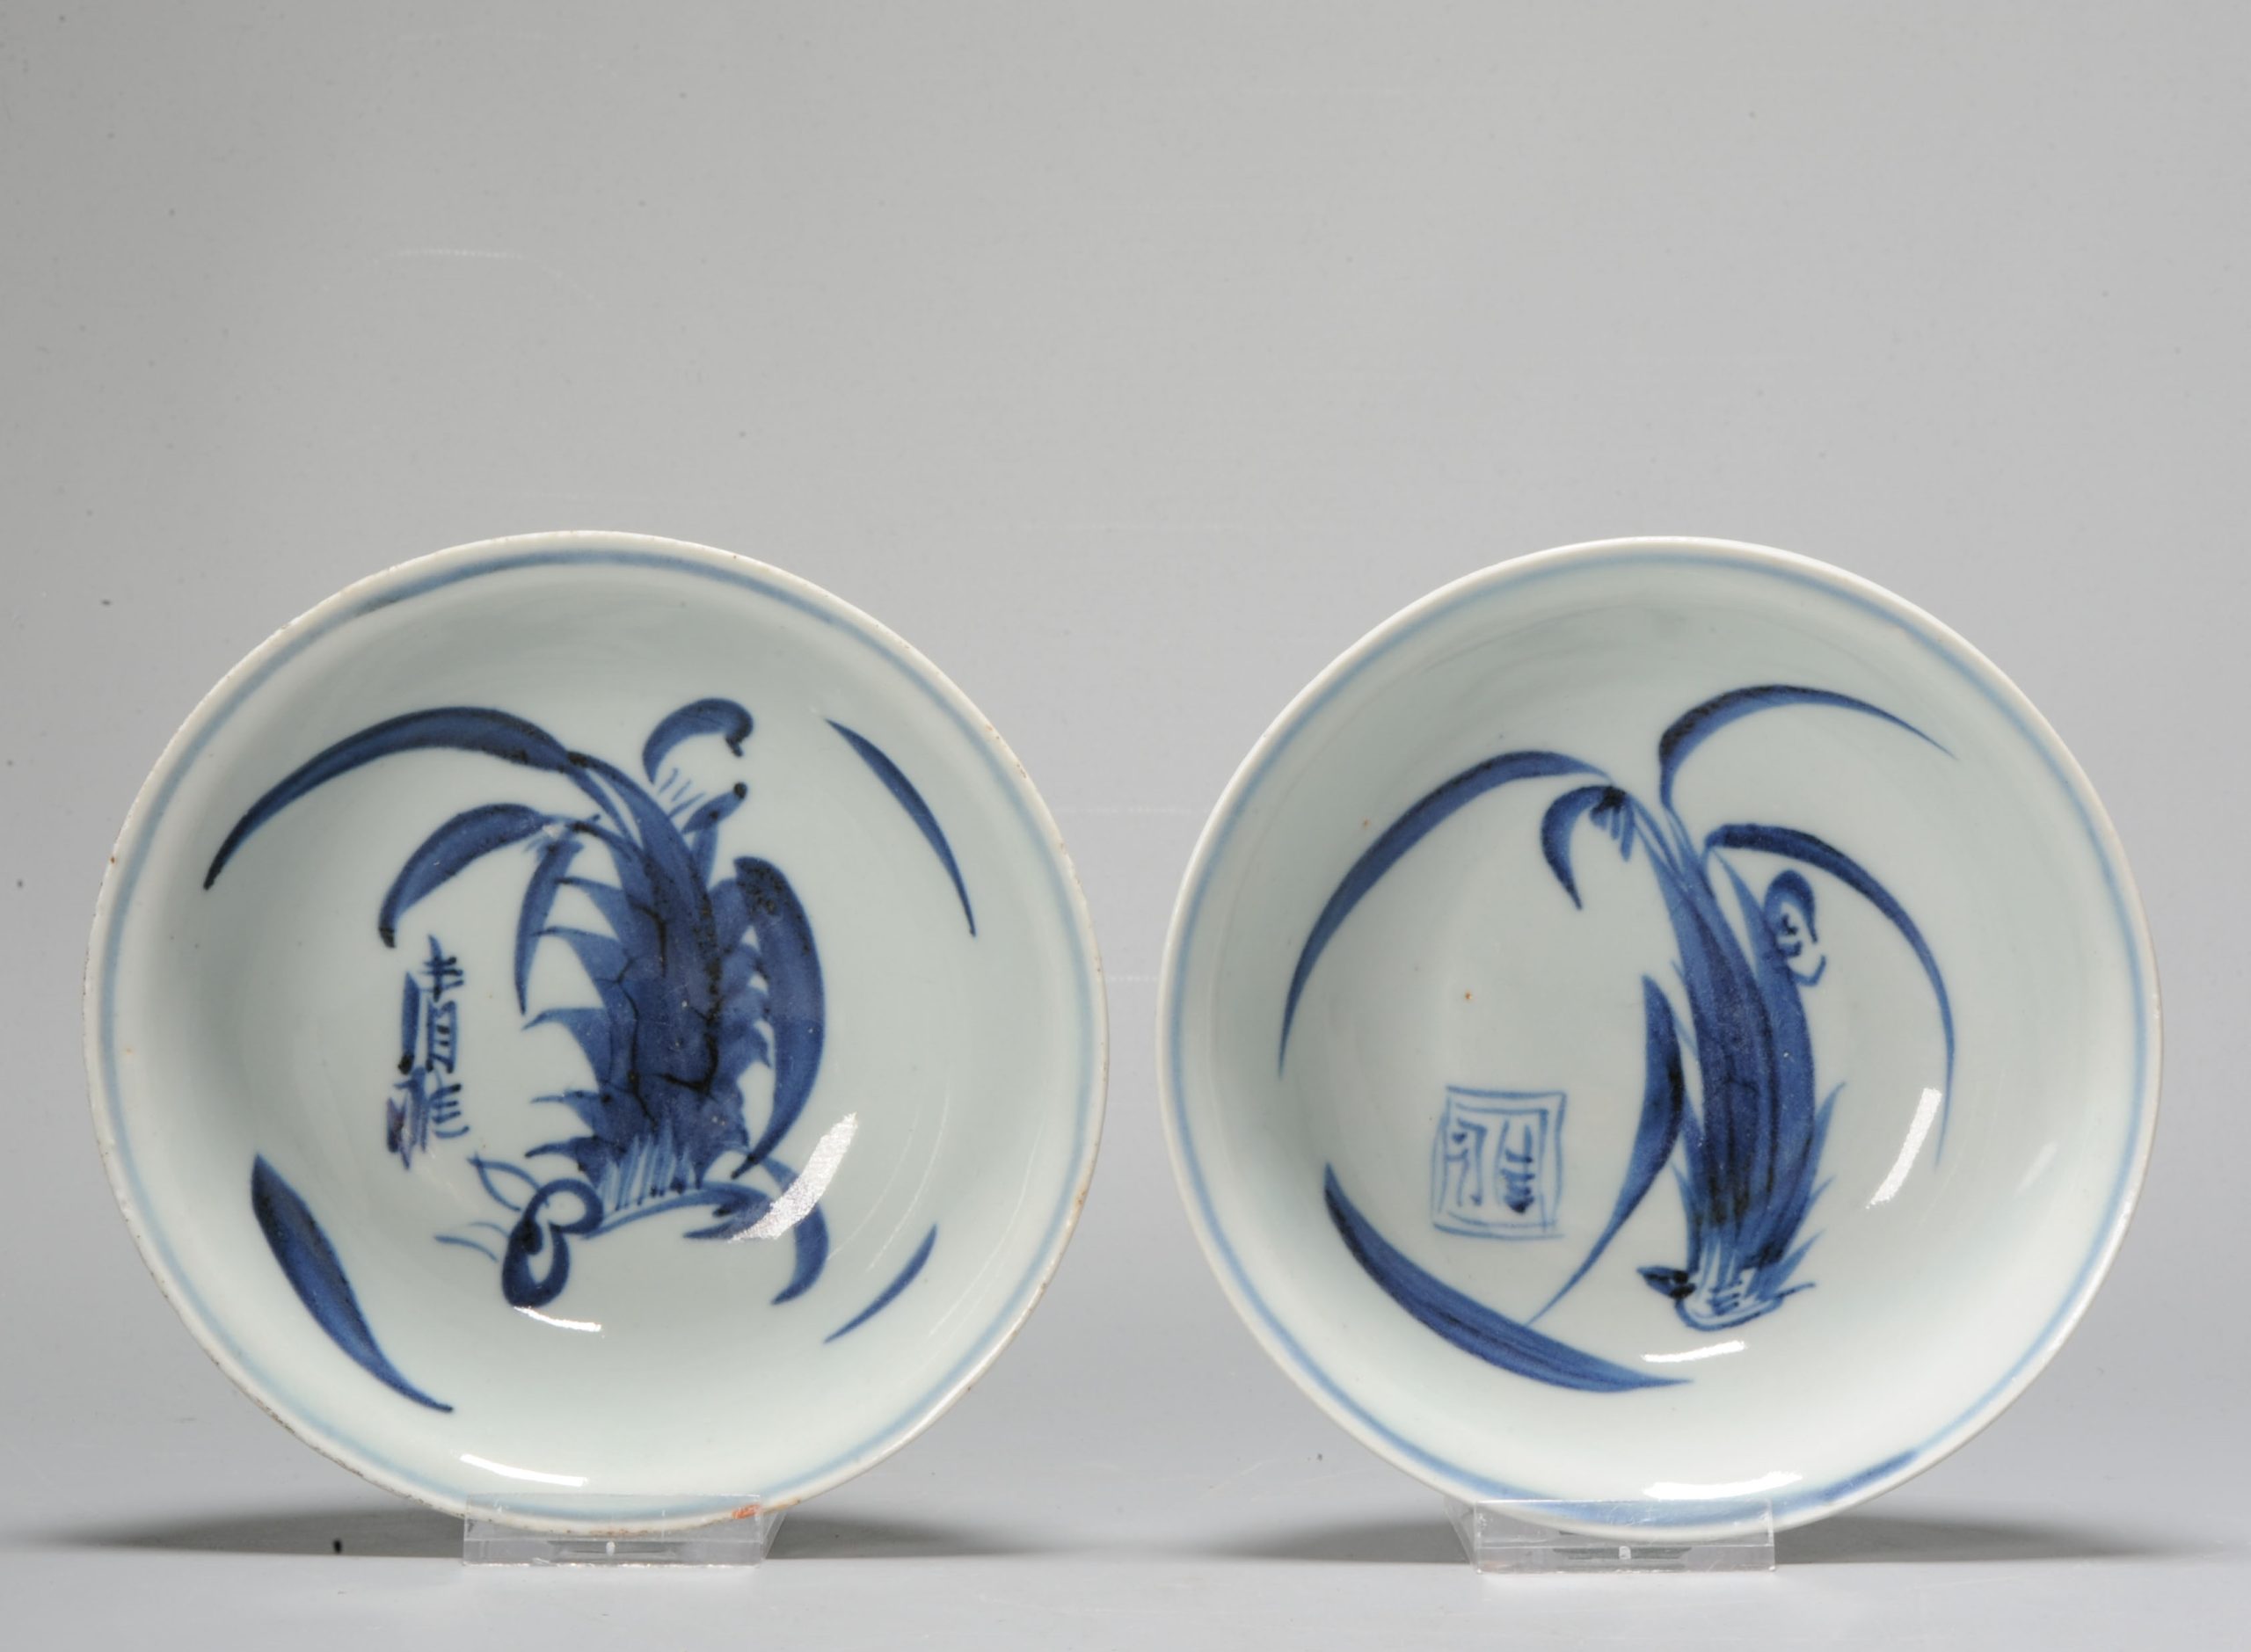 1050 & 0470. Lovely Pair of late ming bowls. Tianqi or Wanli. Pineapple with Characters.